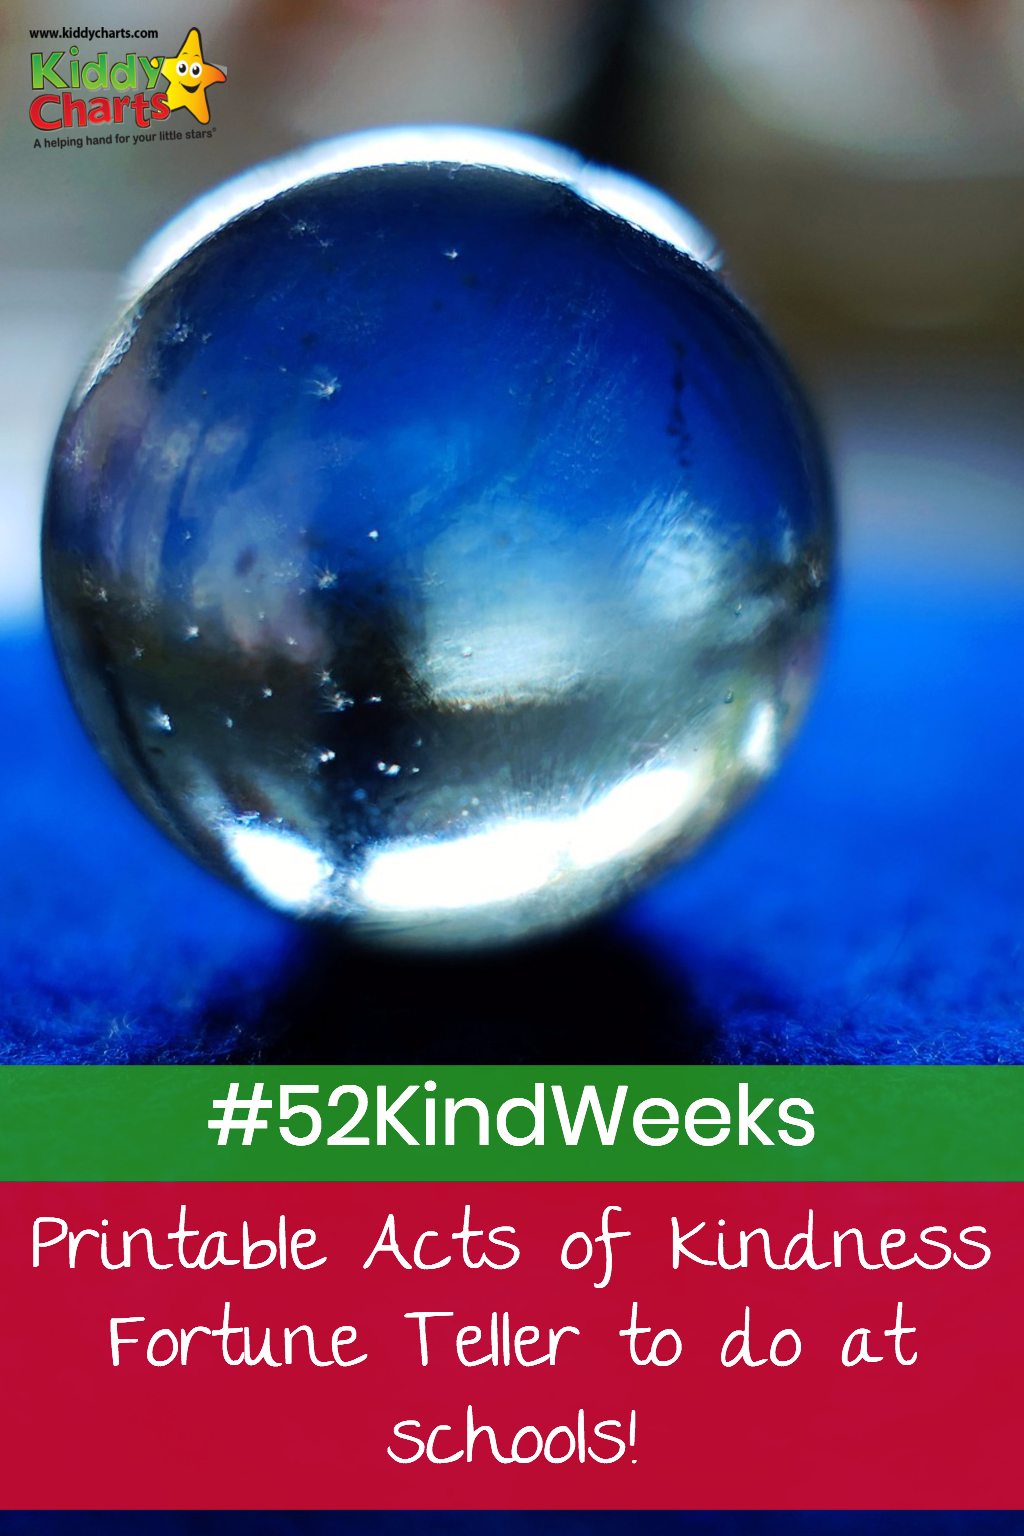 We have a lovely fortune teller for you in #52KindWeeks - why not try it at school as all the random acts of kindness are made to be done there or beforehand! #BeKind #Kindness #RAOK #RandomActsofKindness